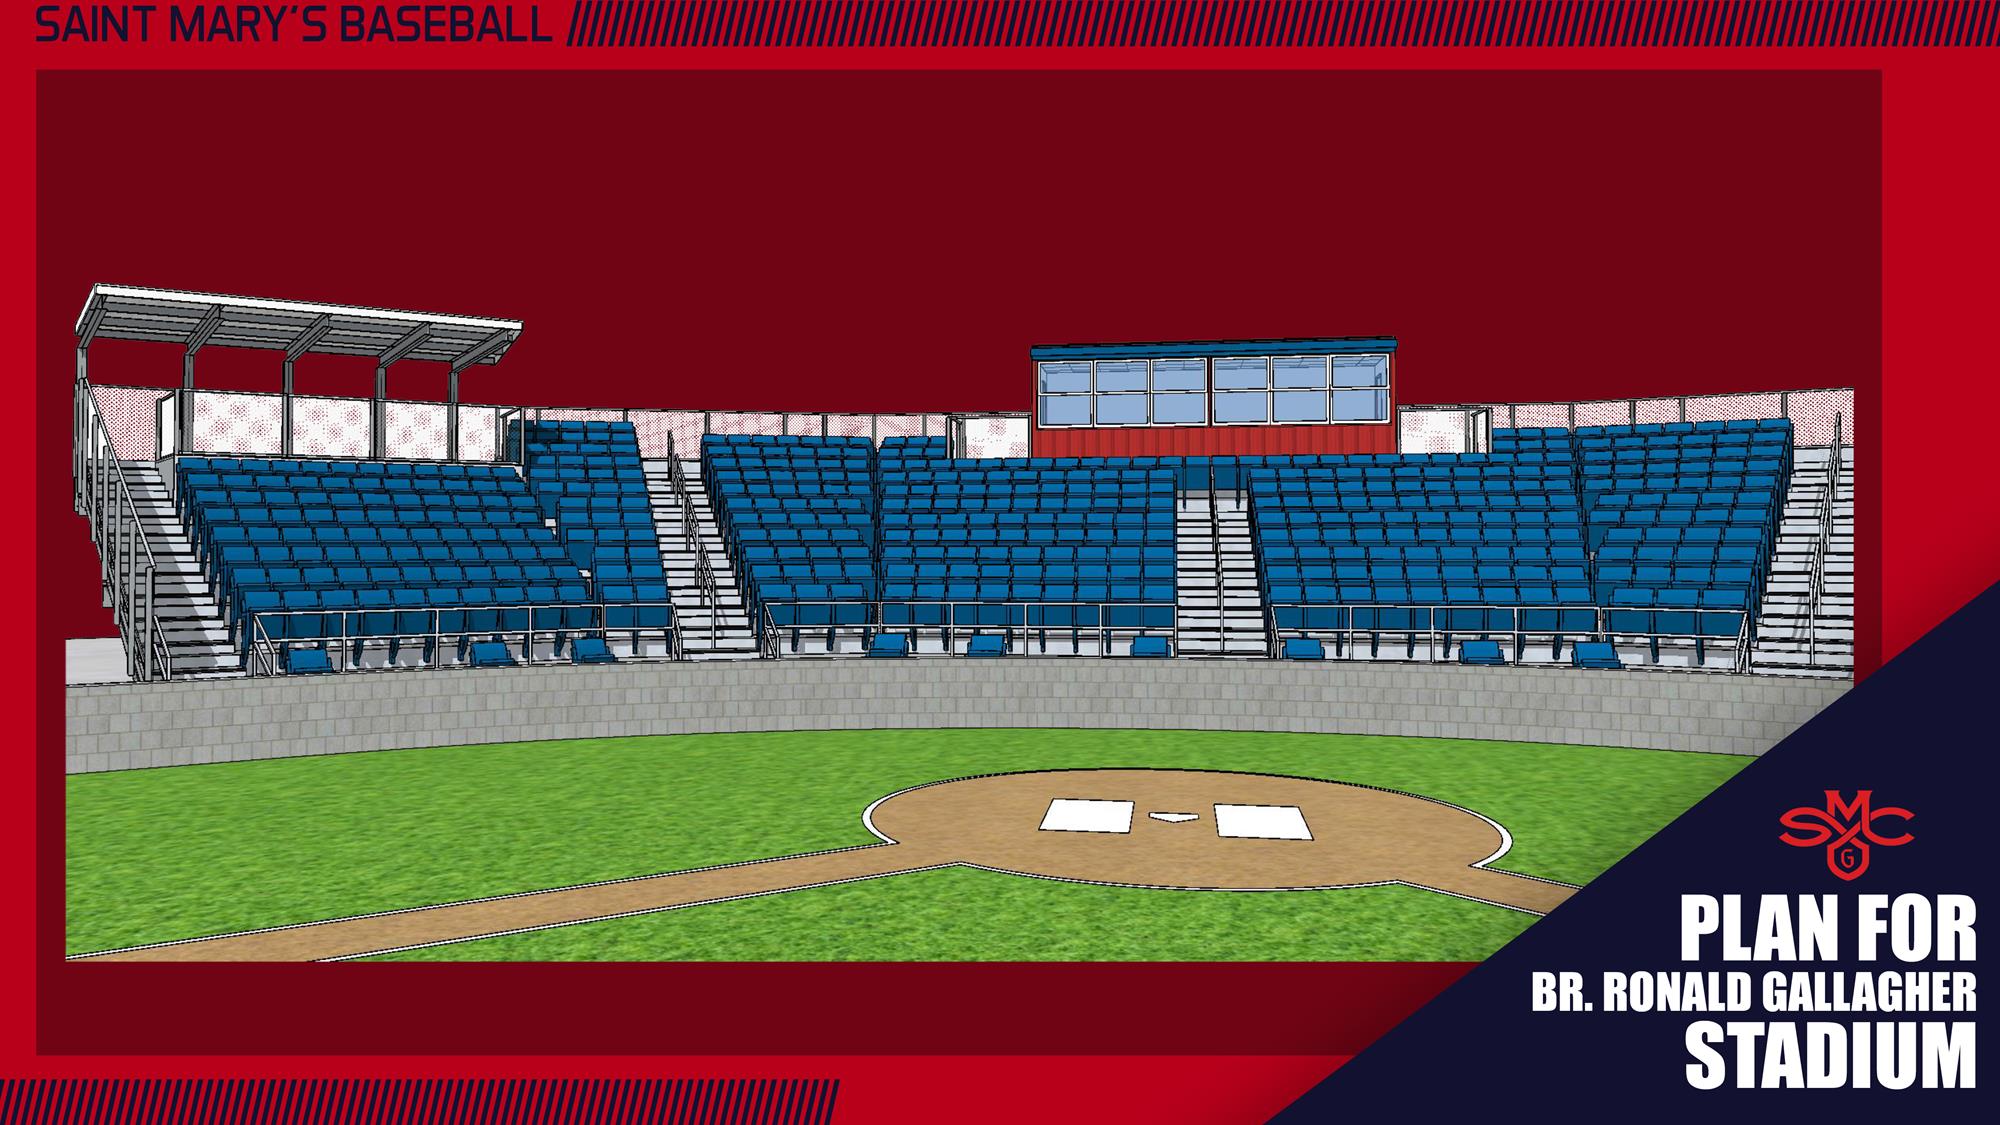 Architectural rendering of Br. Ronald Gallagher Stadium